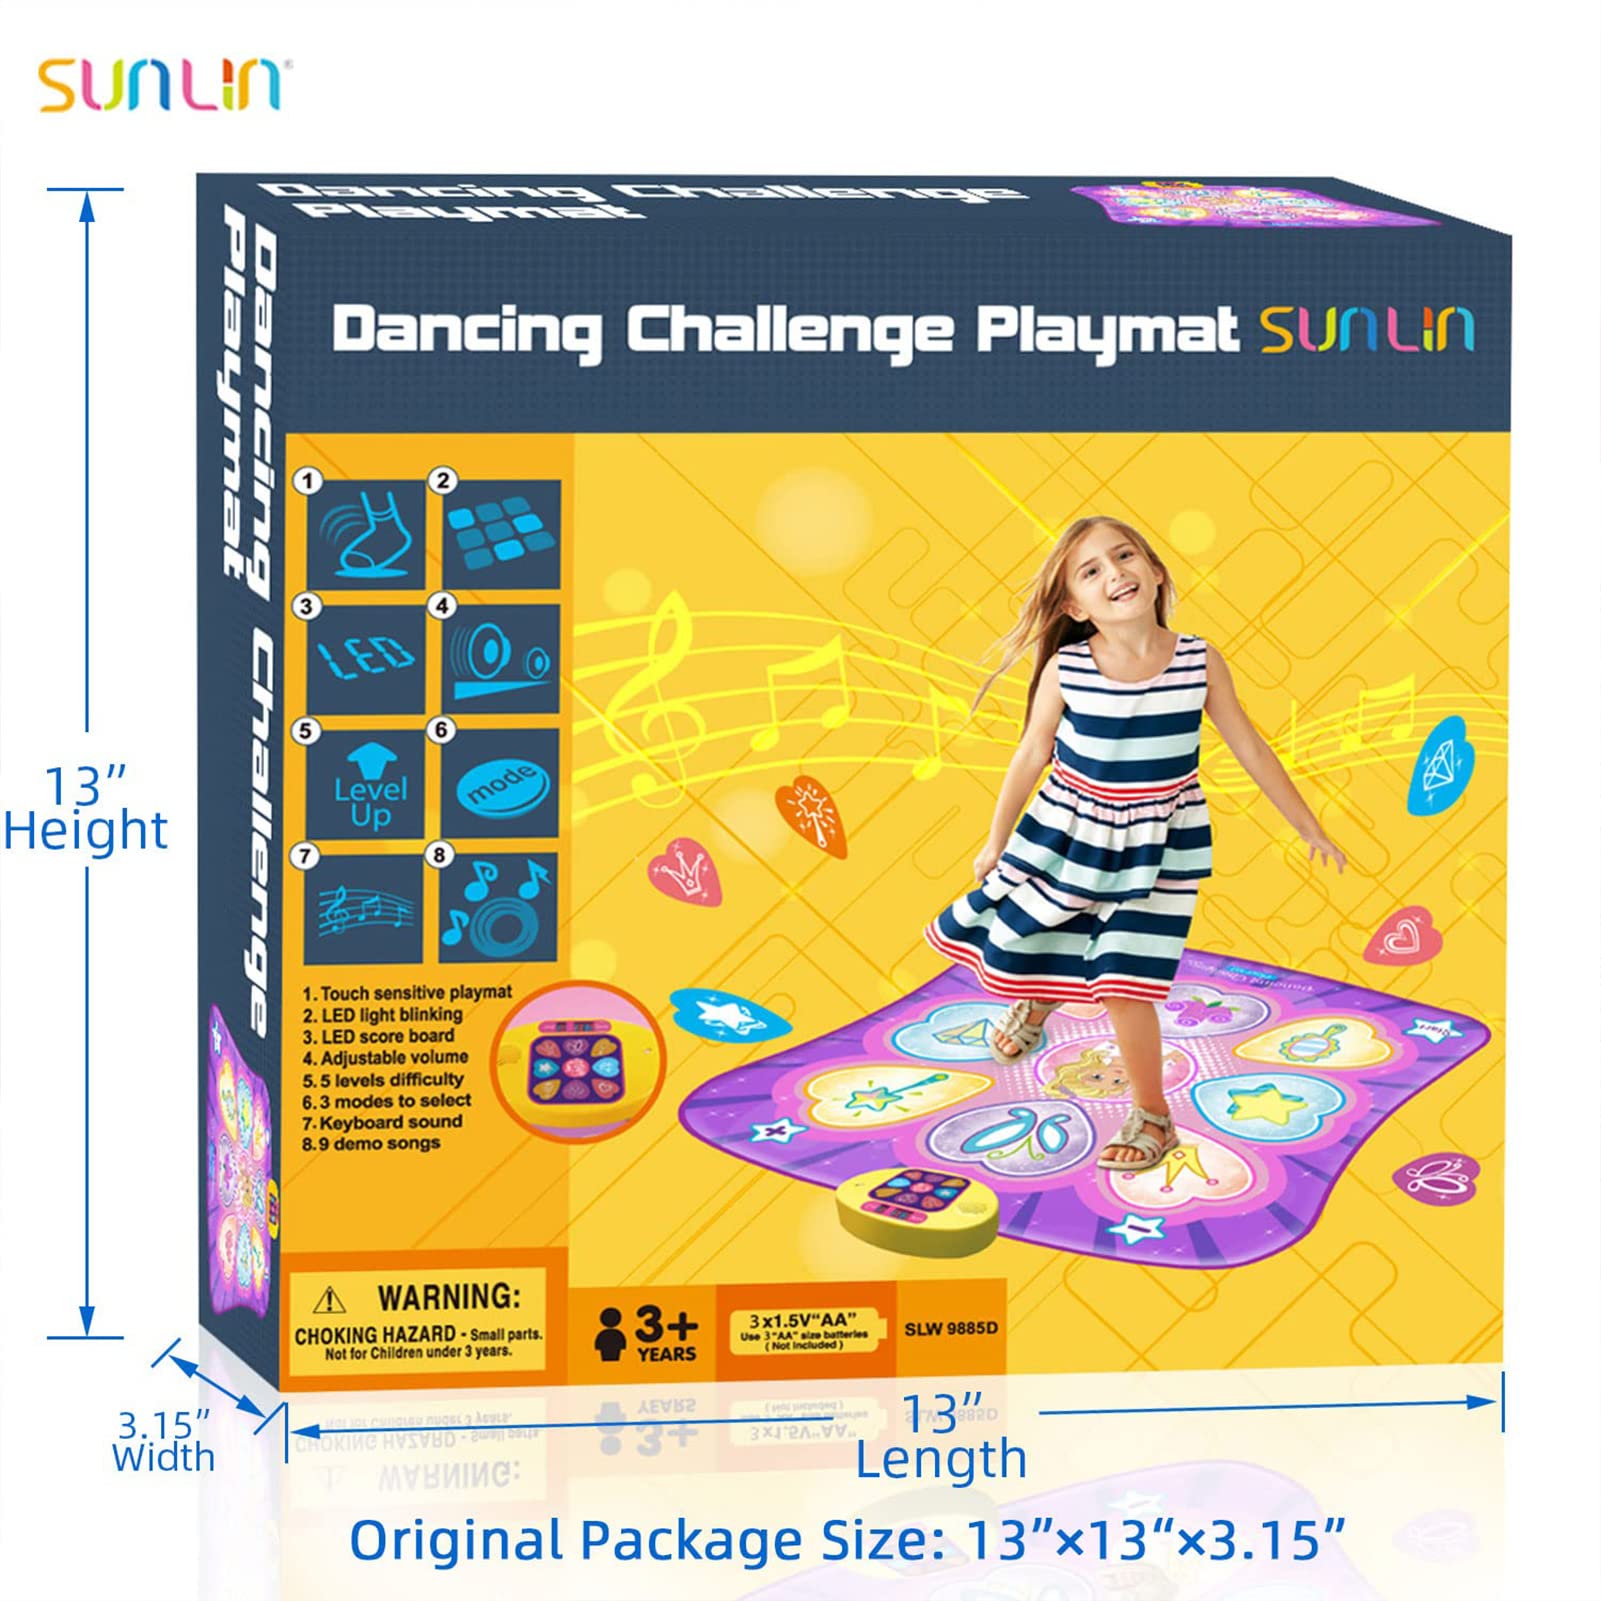 SUNLIN Dance Mat Toys for Girls Ages 3-10 | Dance Pad with LED Lights, Adjustable Volume, 9 Built-in Music, 7 Game Modes, 5 Challenge Levels | Christmas Birthday Gifts for 3 4 5 6 7 8+ Years Old Girl